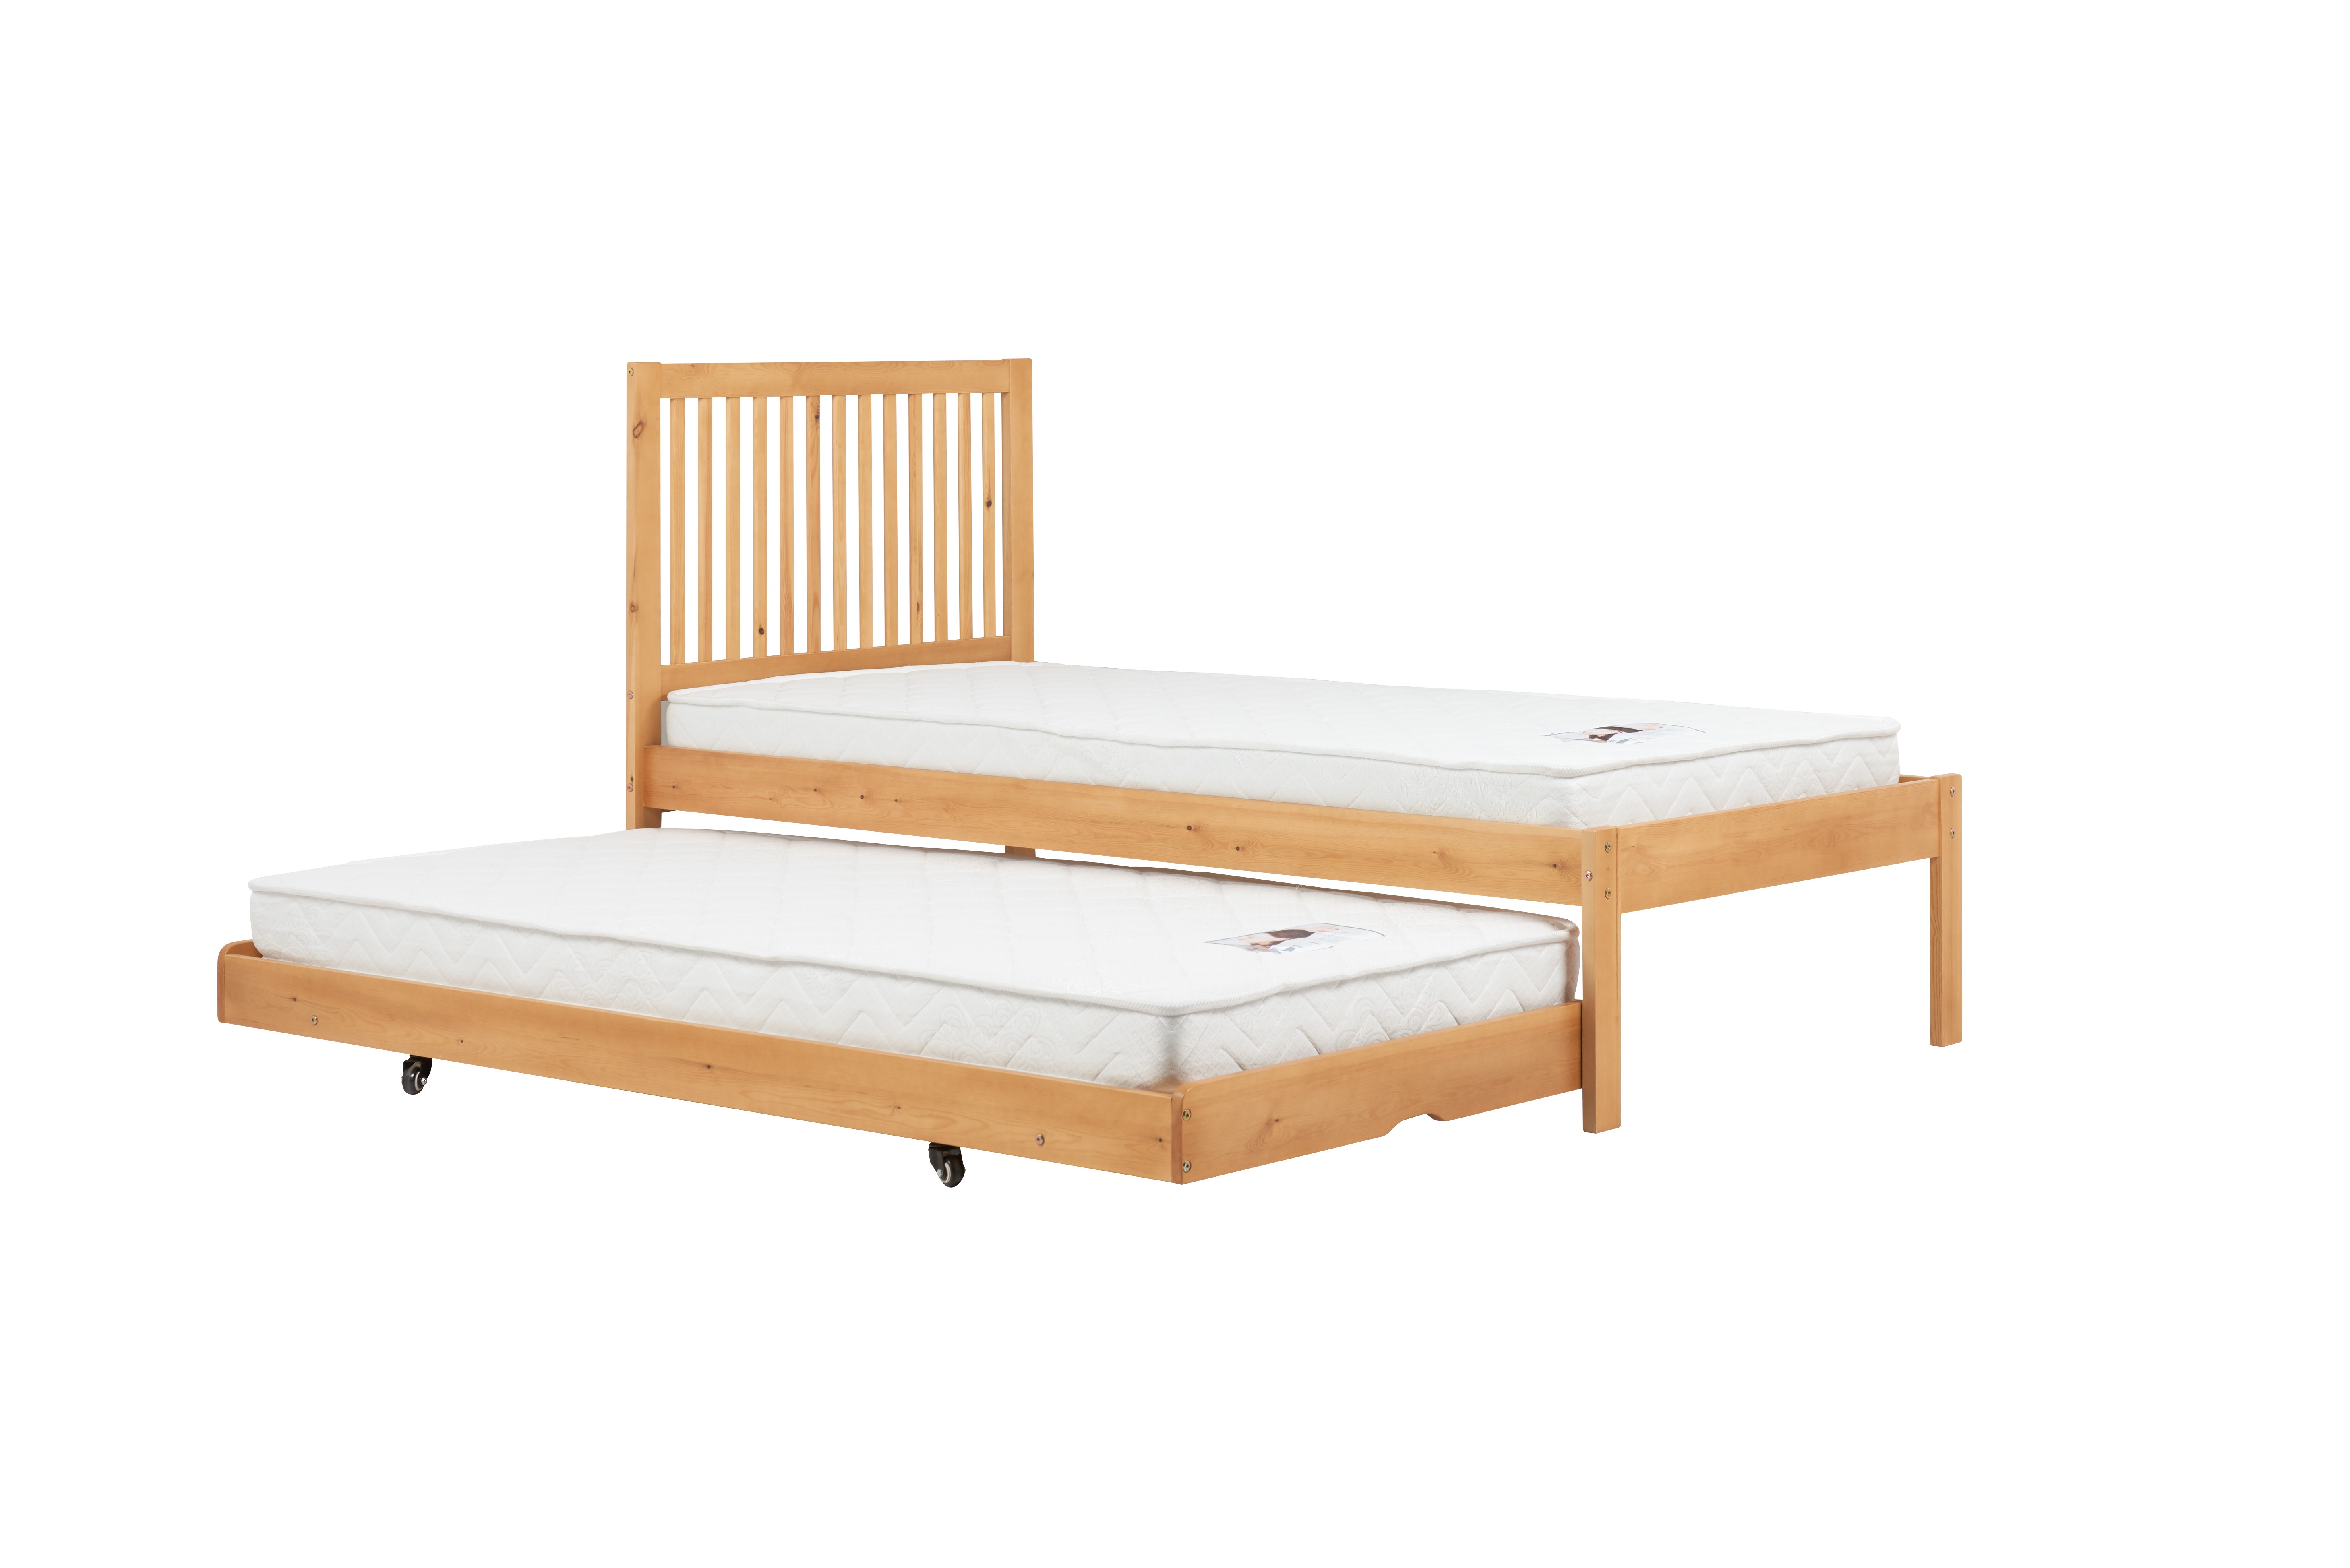 Malvern Trundle Guest Bed